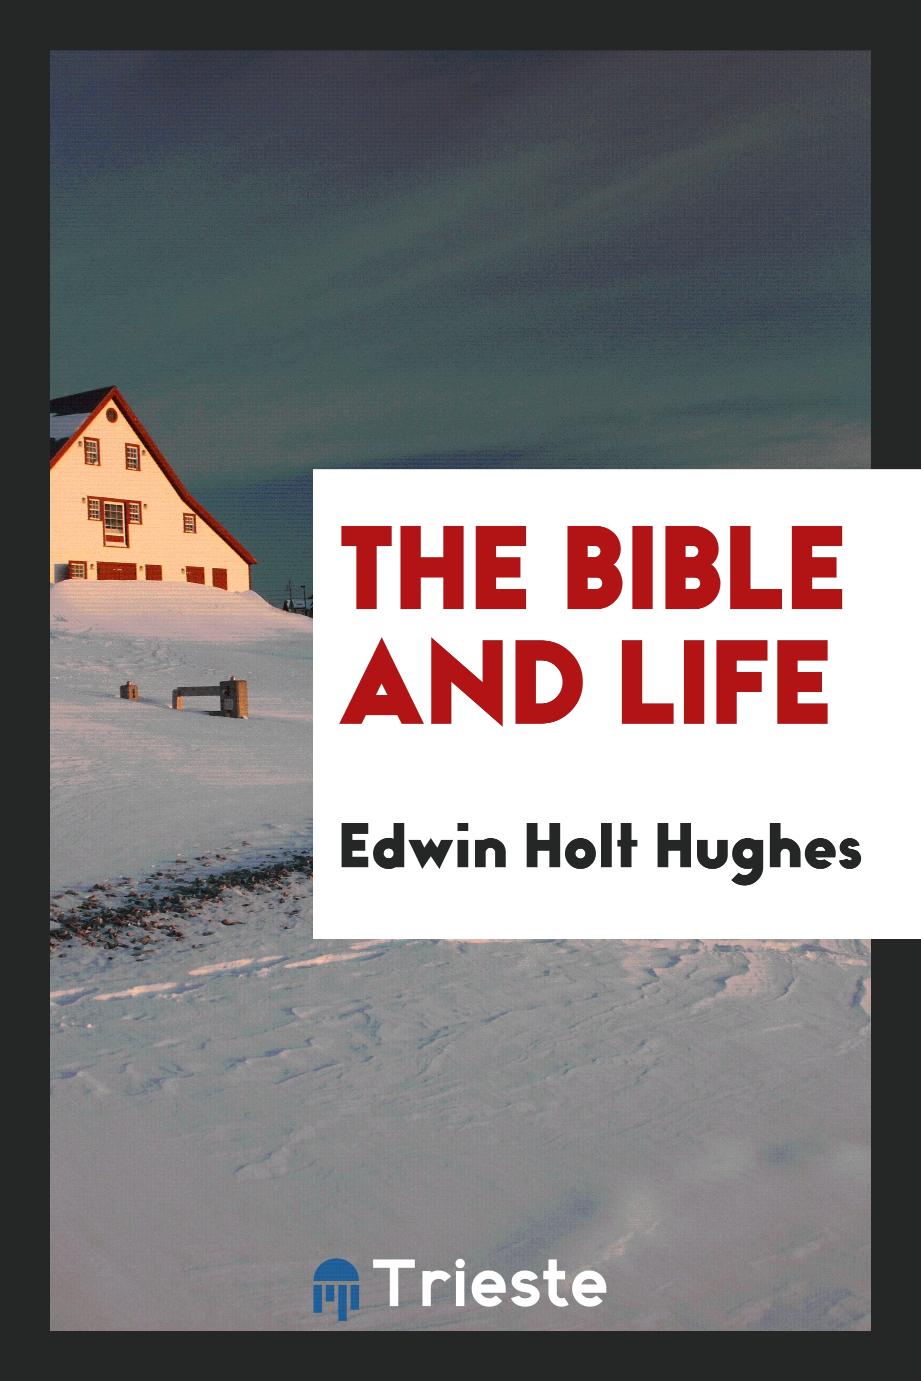 The Bible and life